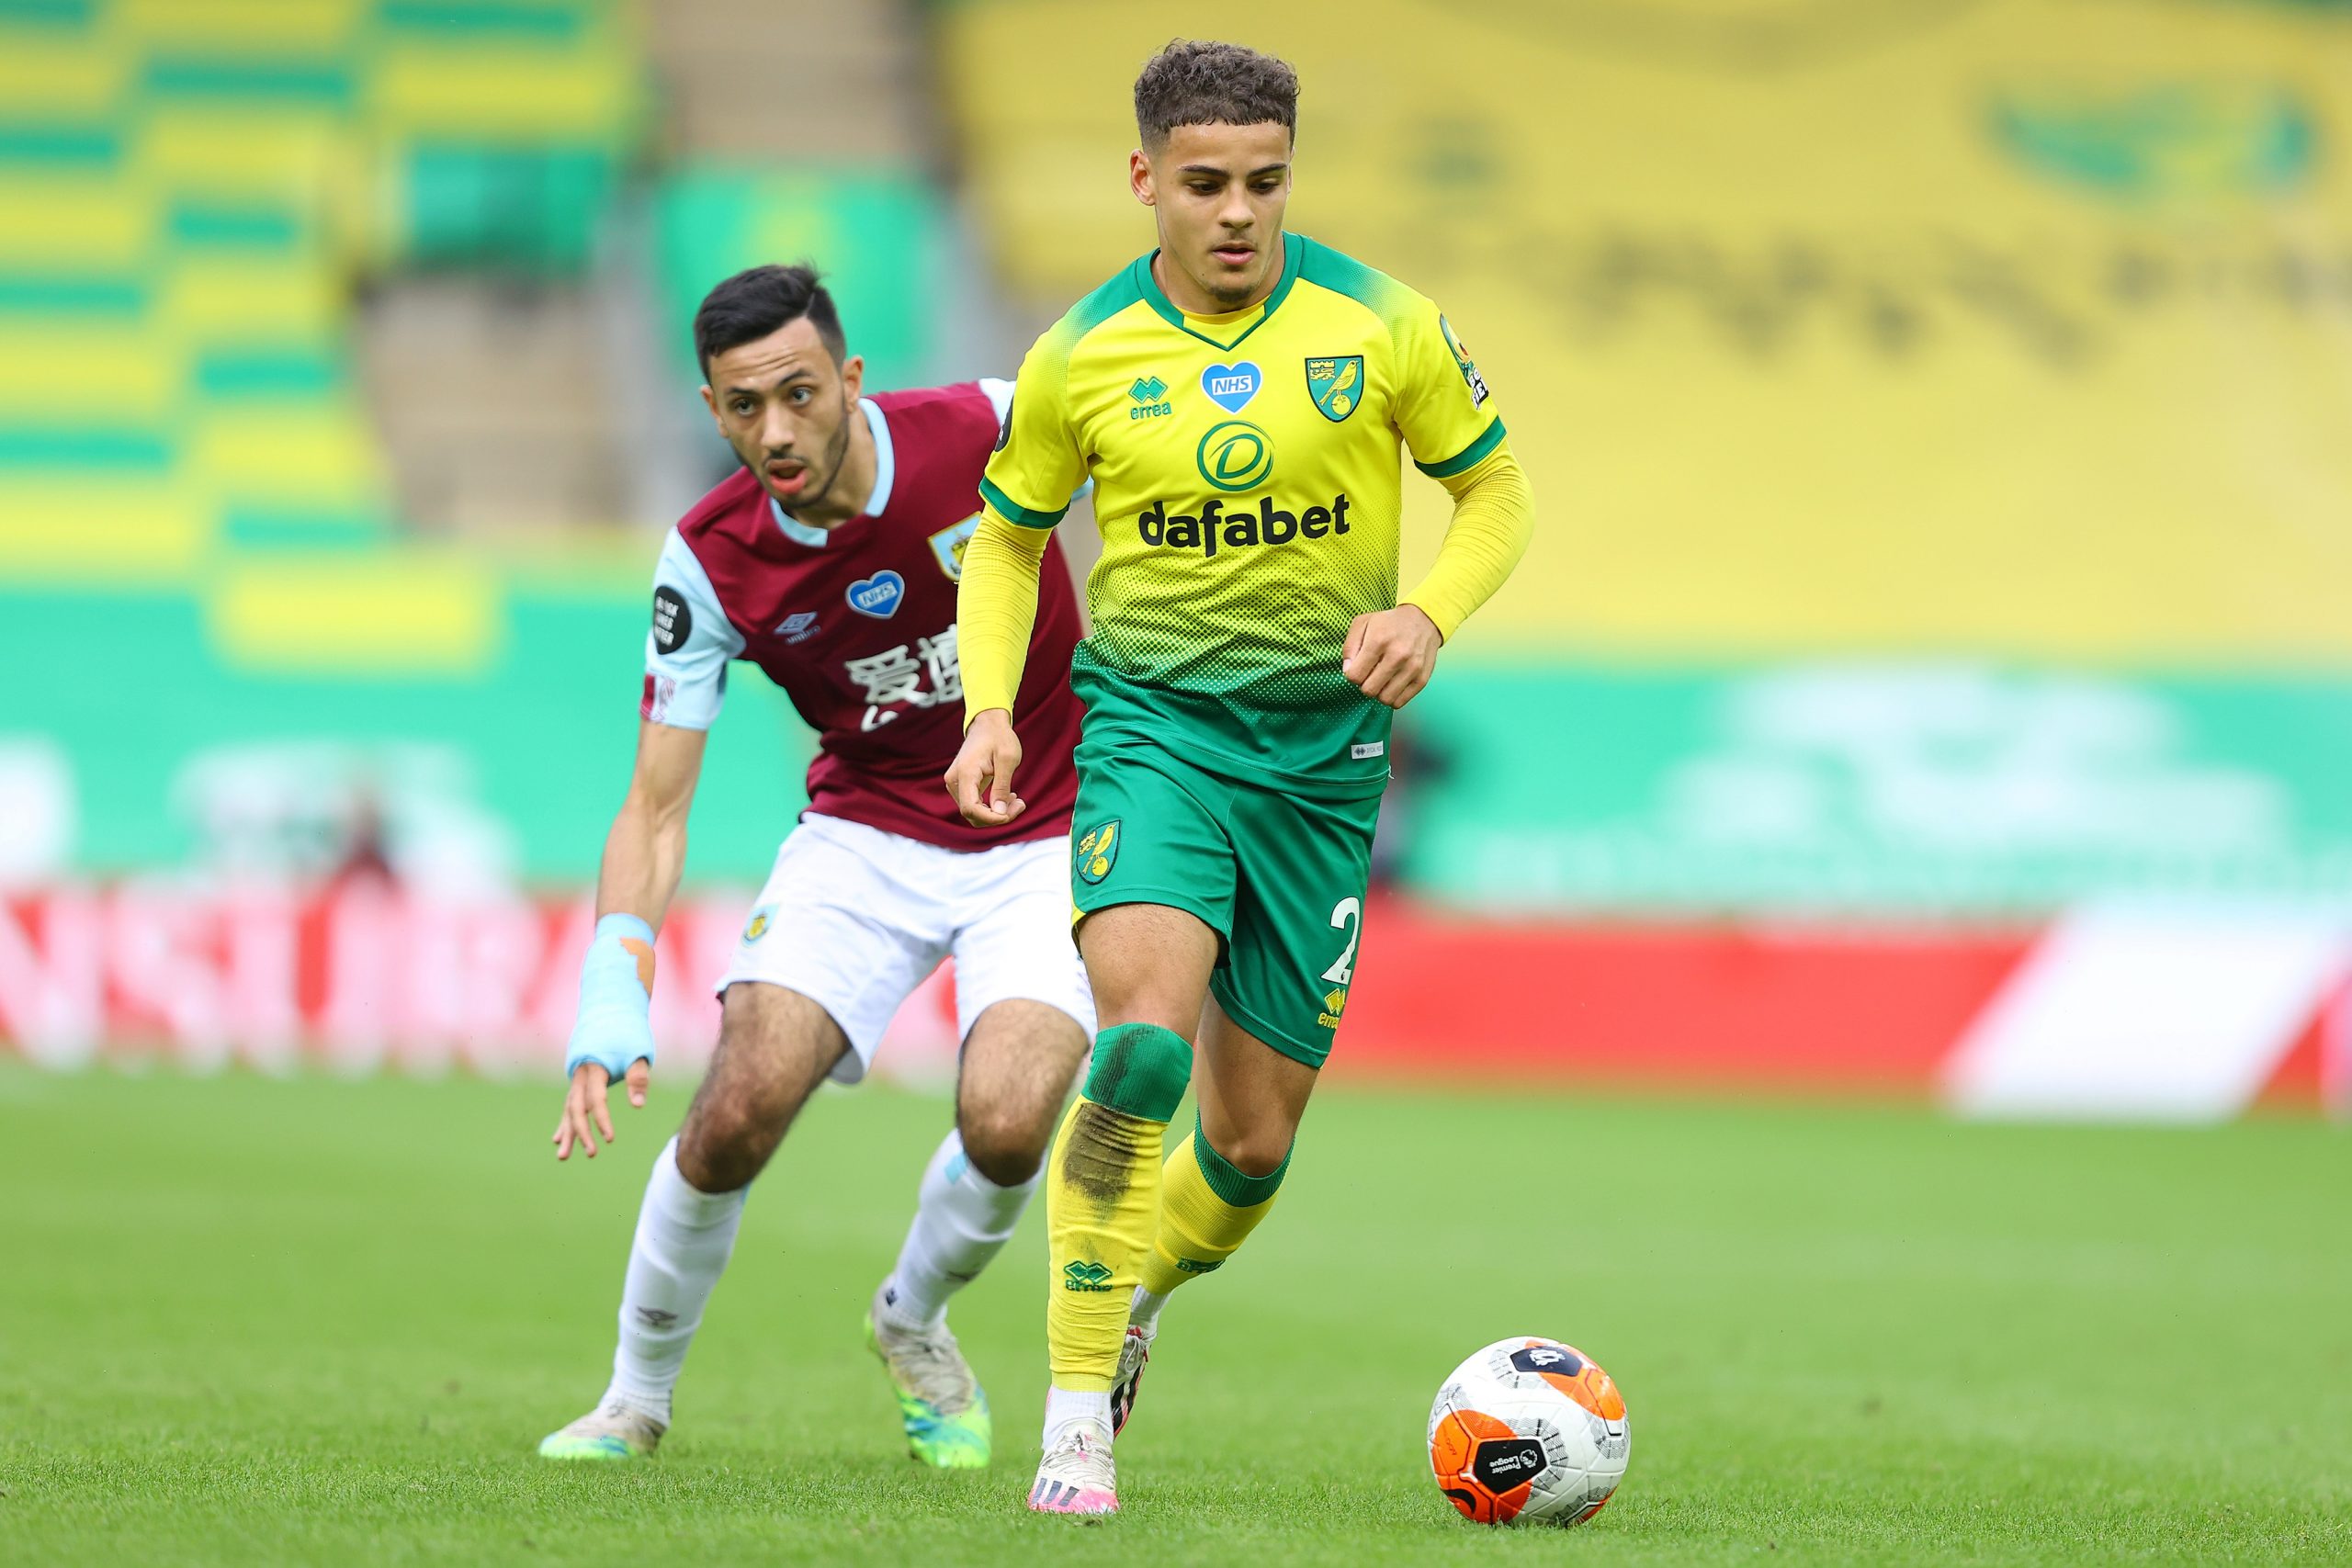 Everton locked in a three-way battle for Max Aarons who is in action in the picture